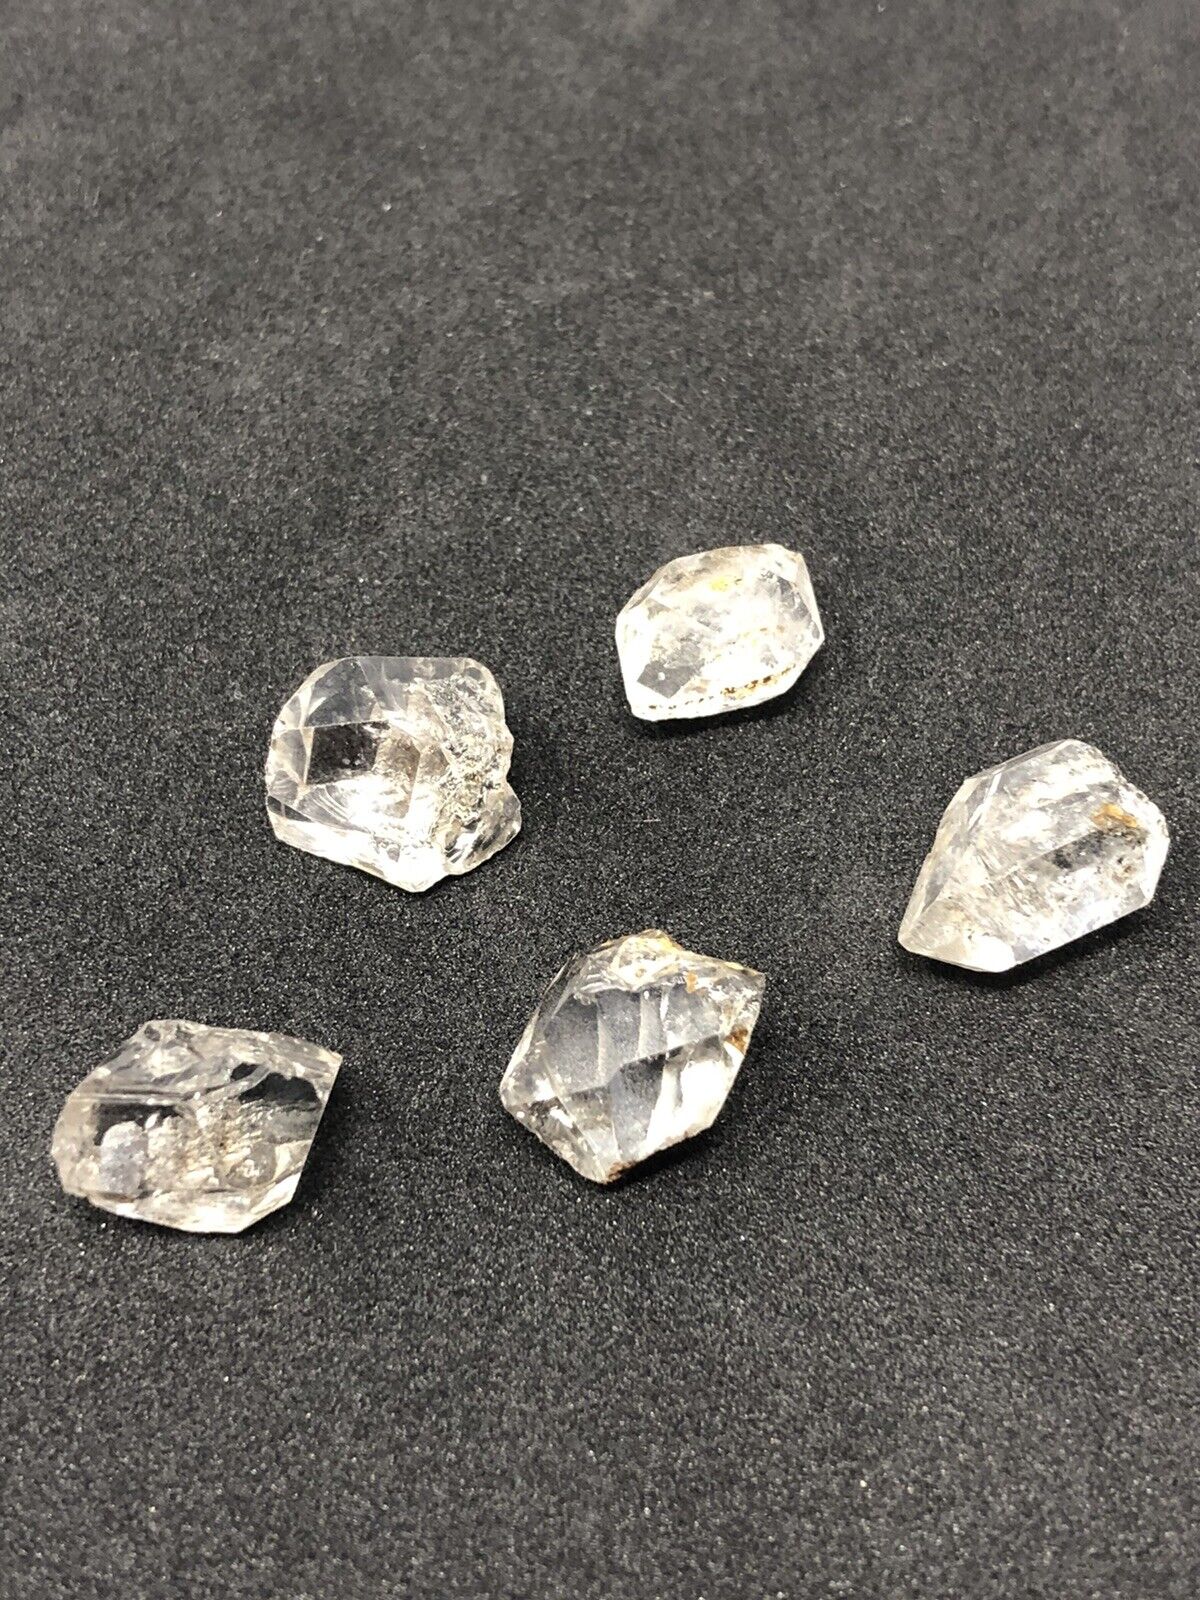 5 Piece Set Collection Herkimer Diamond Quartz 7.8g raw & Water Washed Only C2